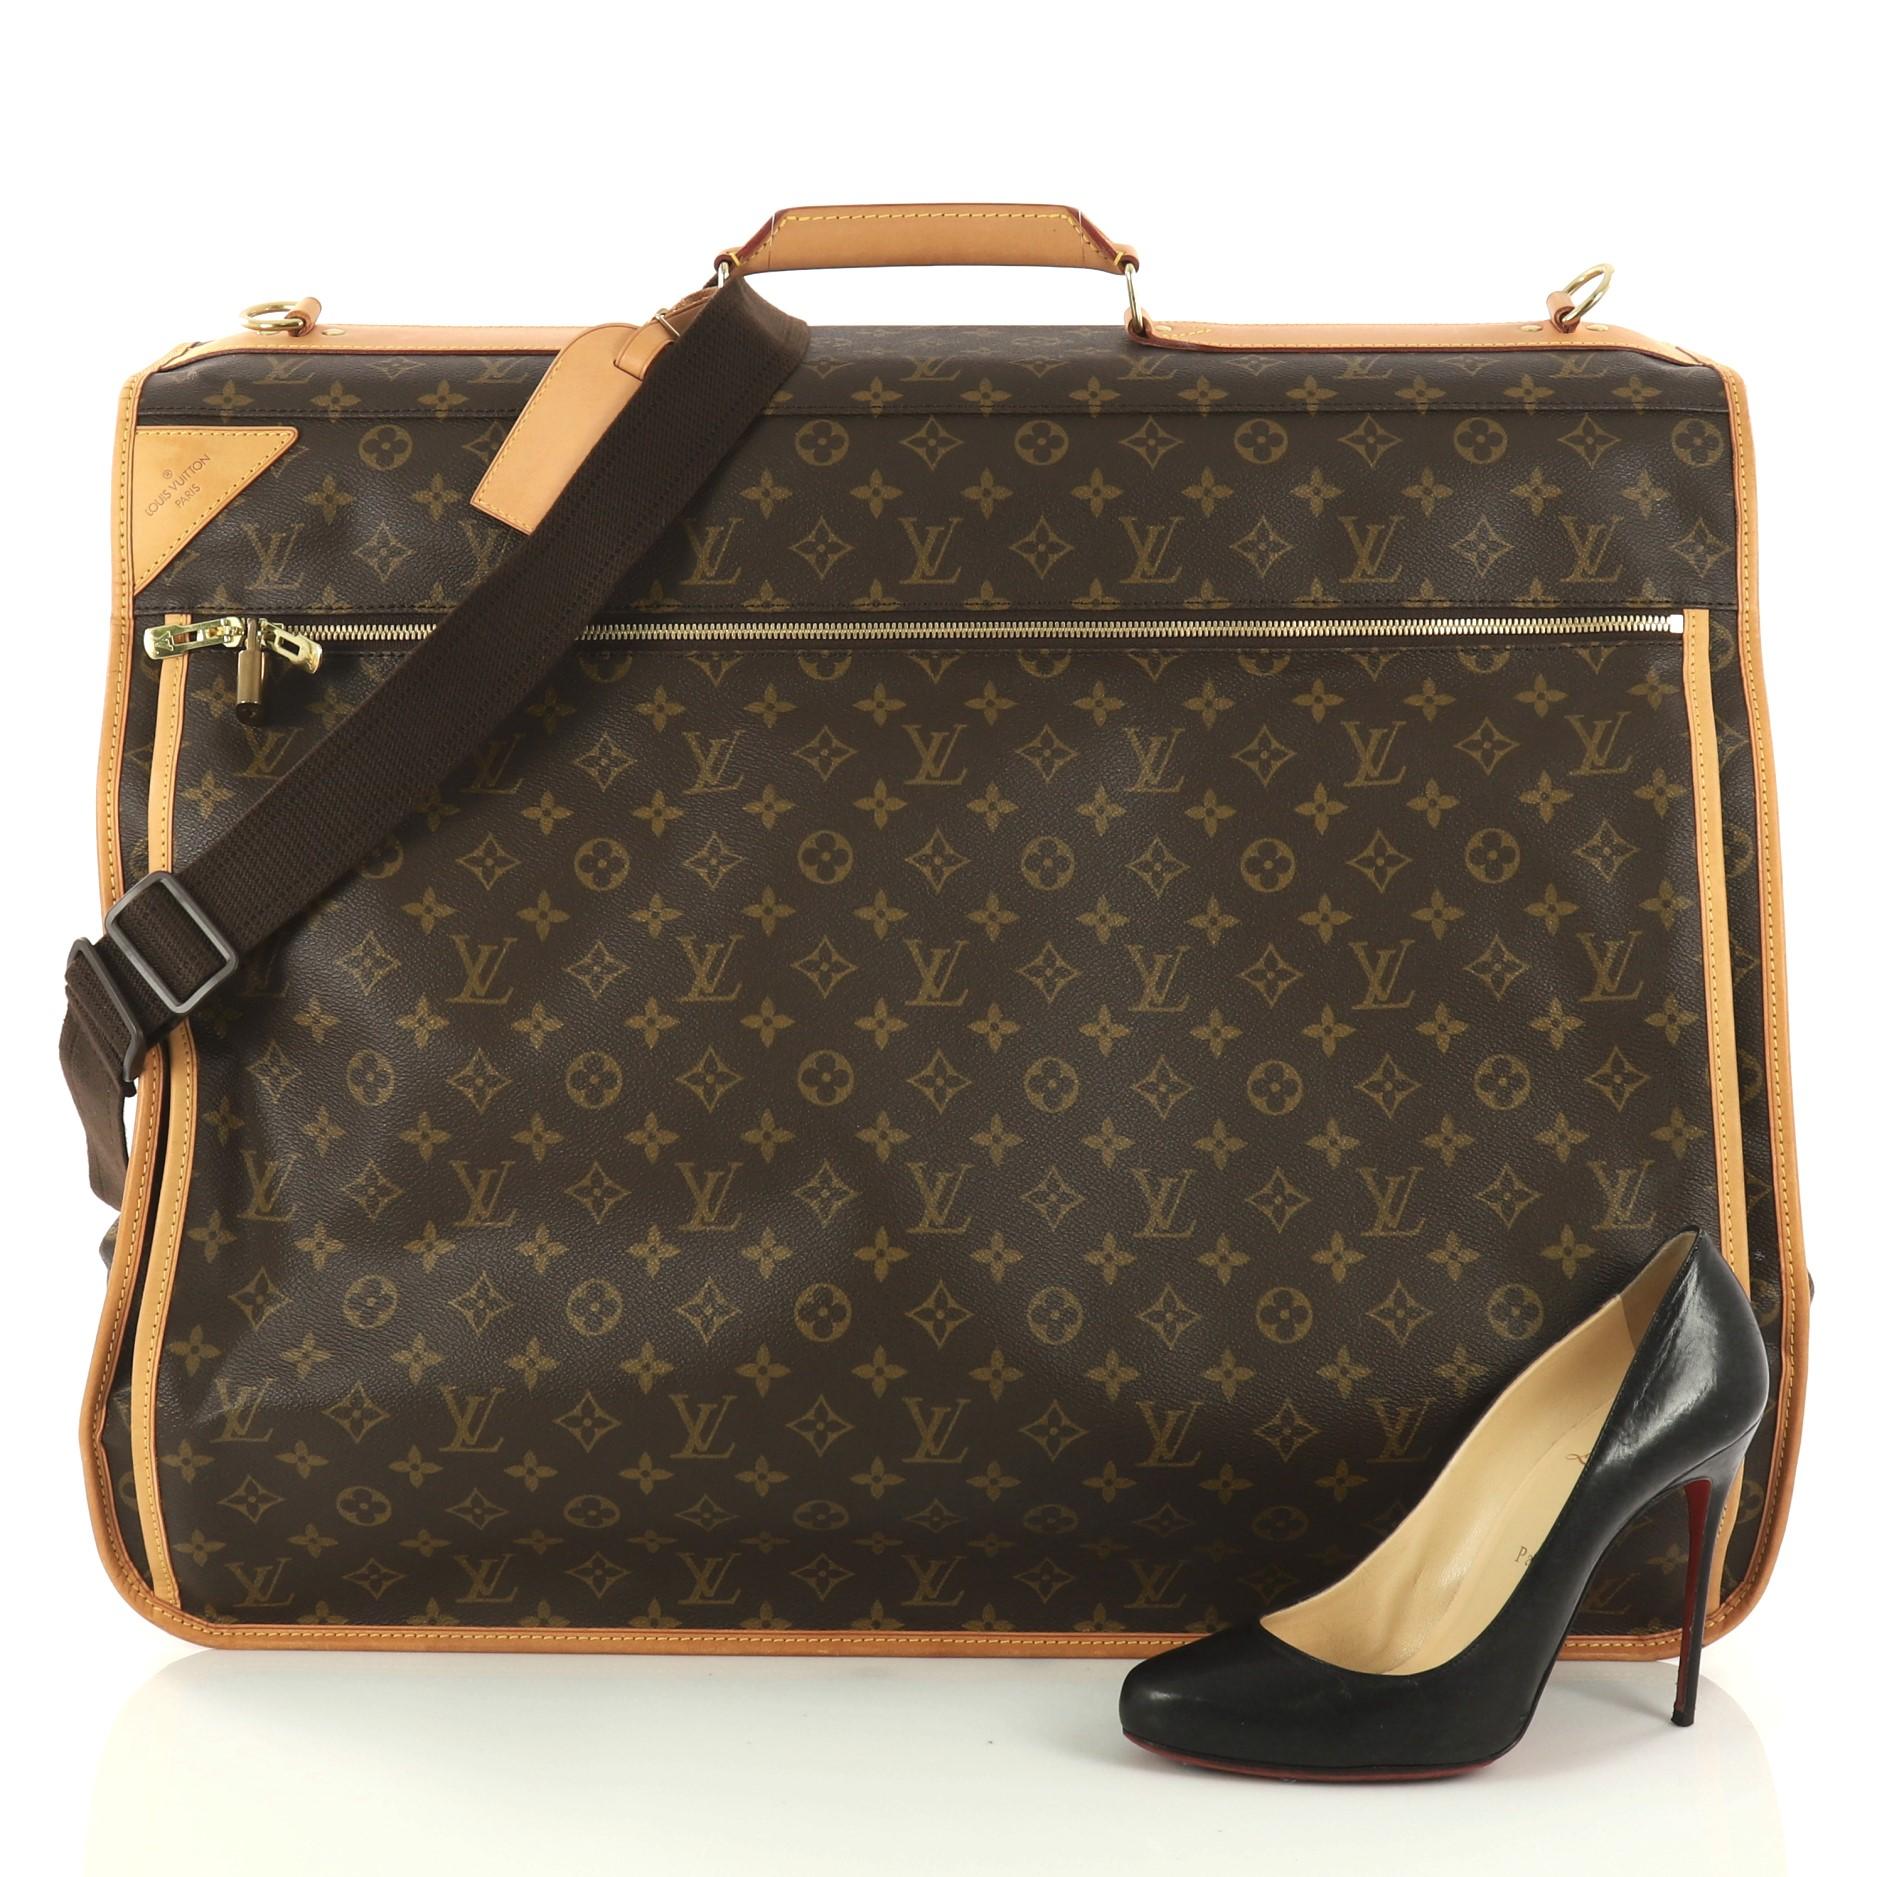 This authentic Louis Vuitton Garment Carrier Bag Monogram Canvas Five Hanger is a functional and sophisticated piece to store all your wardrobe and travel necessities. Constructed in Louis Vuitton's brown monogram coated canvas with vachetta leather